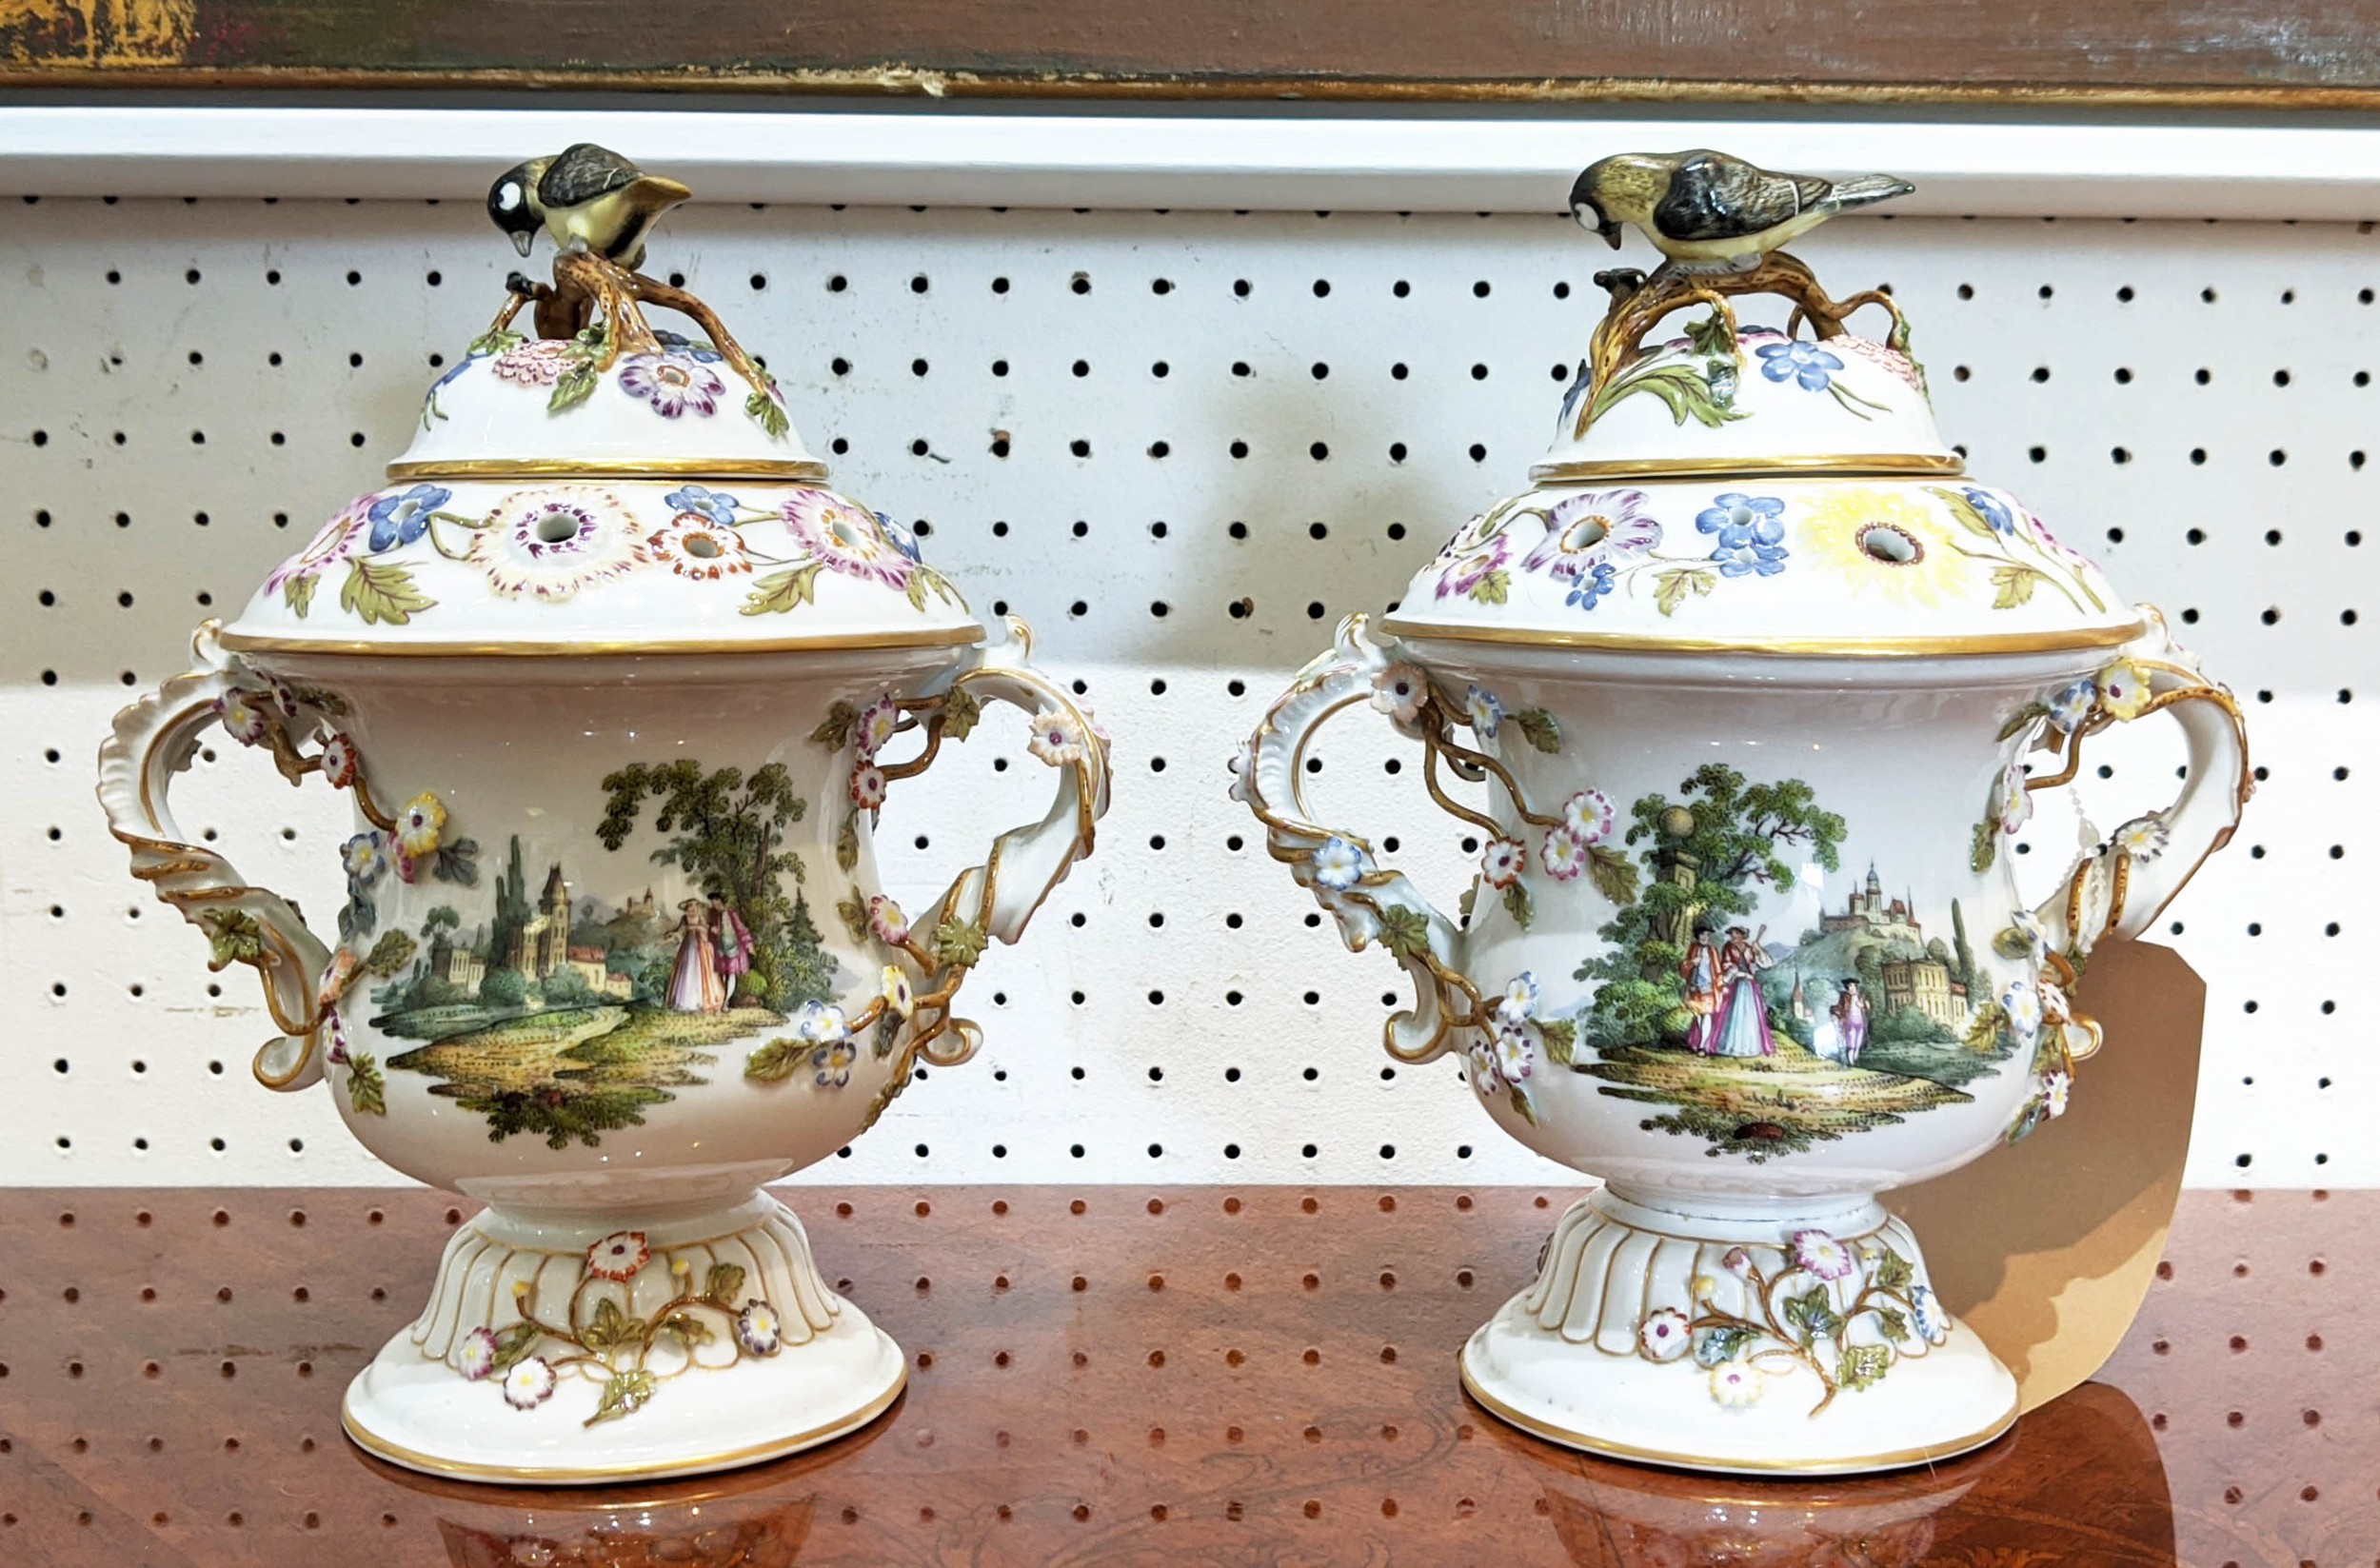 MEISSEN AUGUSTUS REX PORCELAIN URNS, a pair, 25cm H, Rococo style, foliate decorated with figural